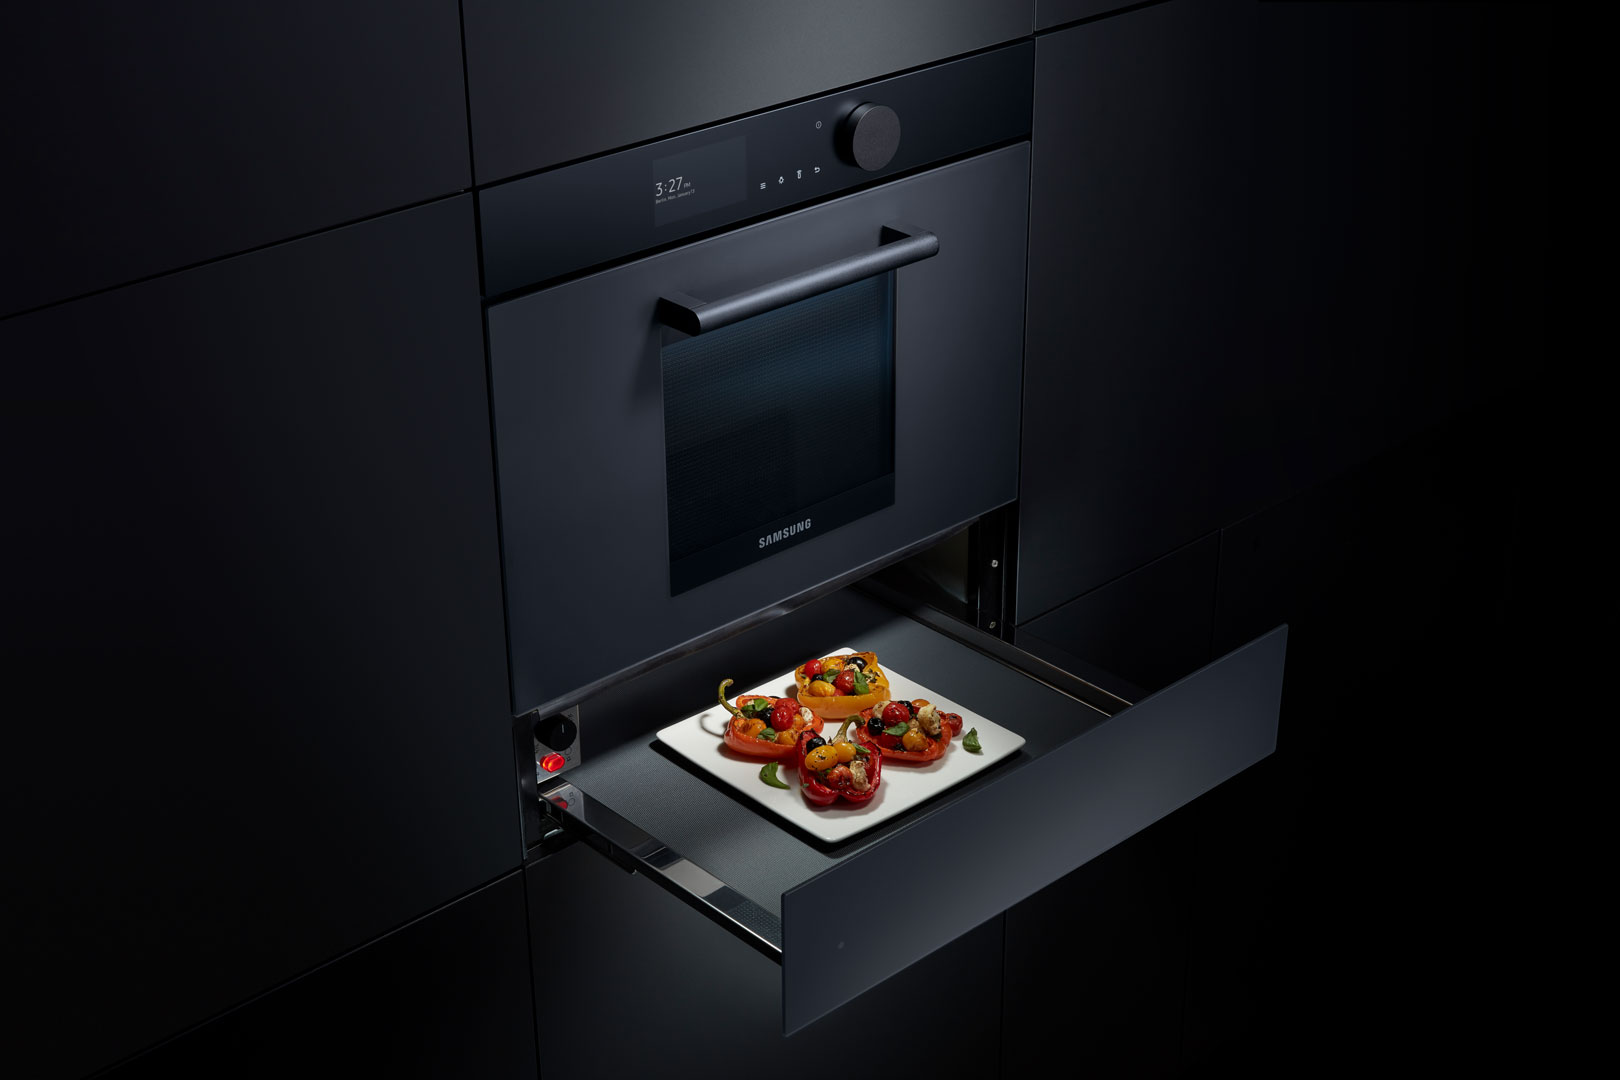 Samsung Integrated Dual Cook Oven Infinite Line™